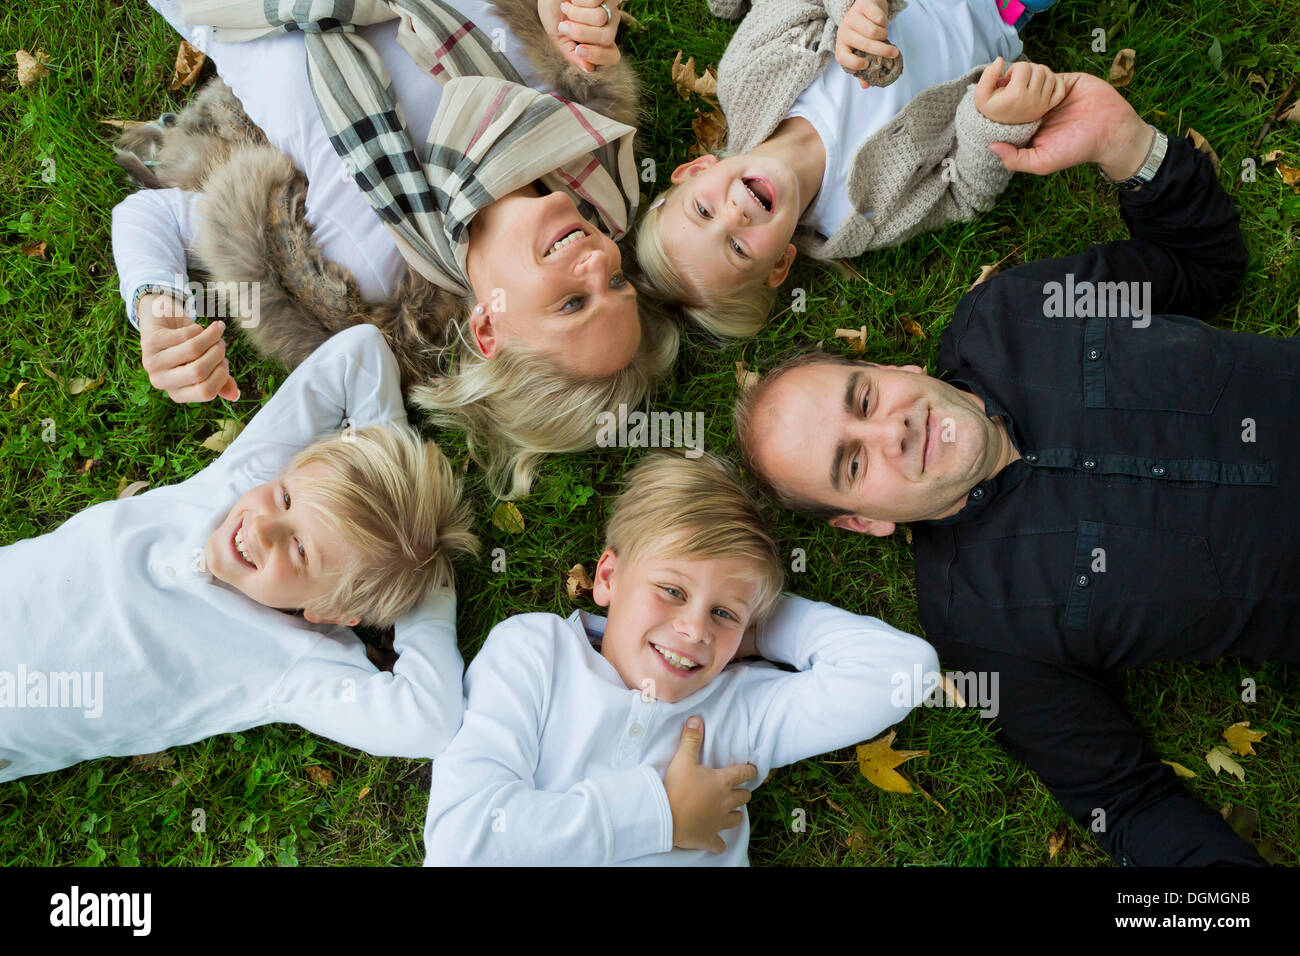 Family with three children lying on the grass Stock Photo